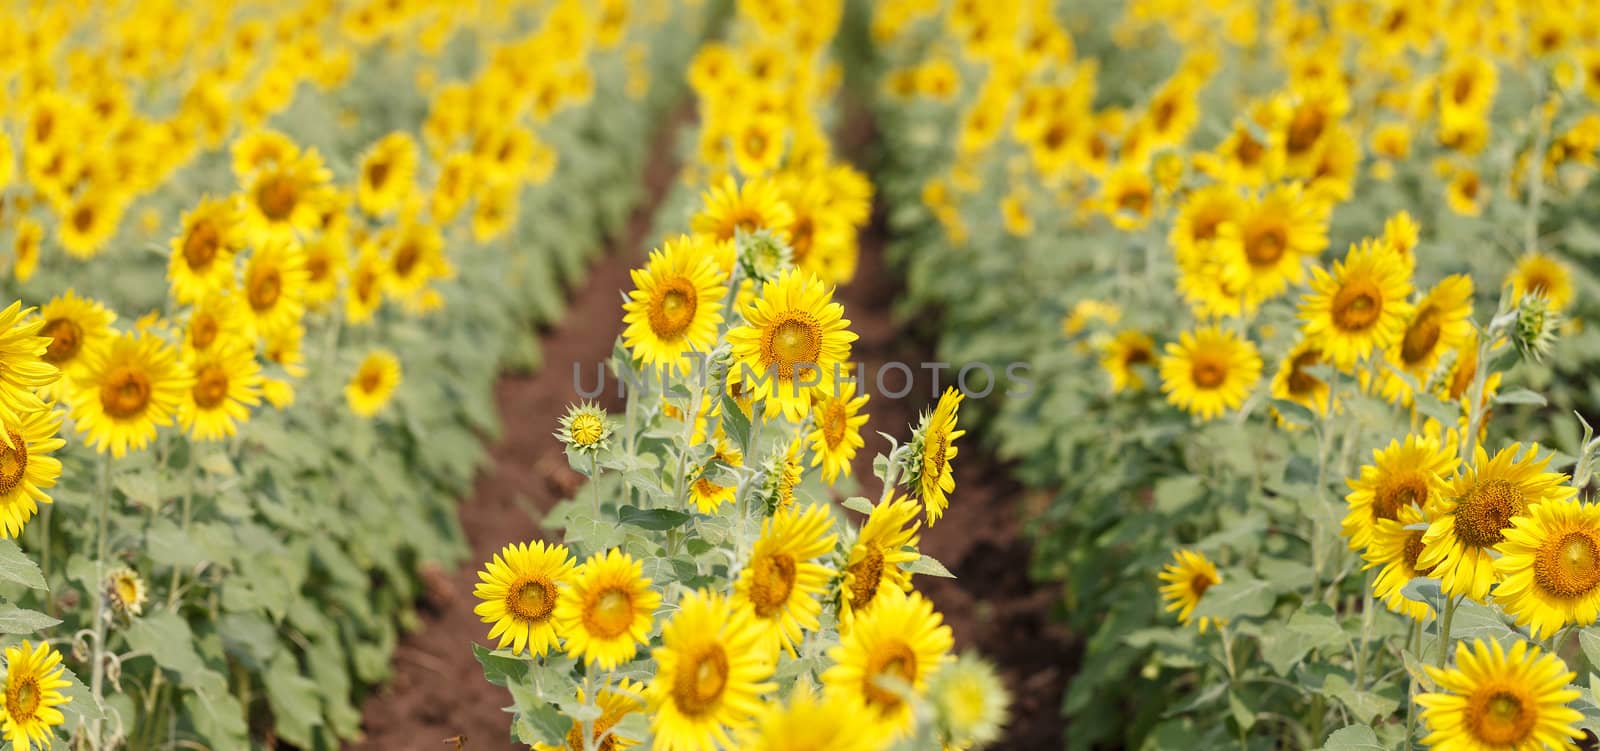 Field with sunflowers by jame_j@homail.com